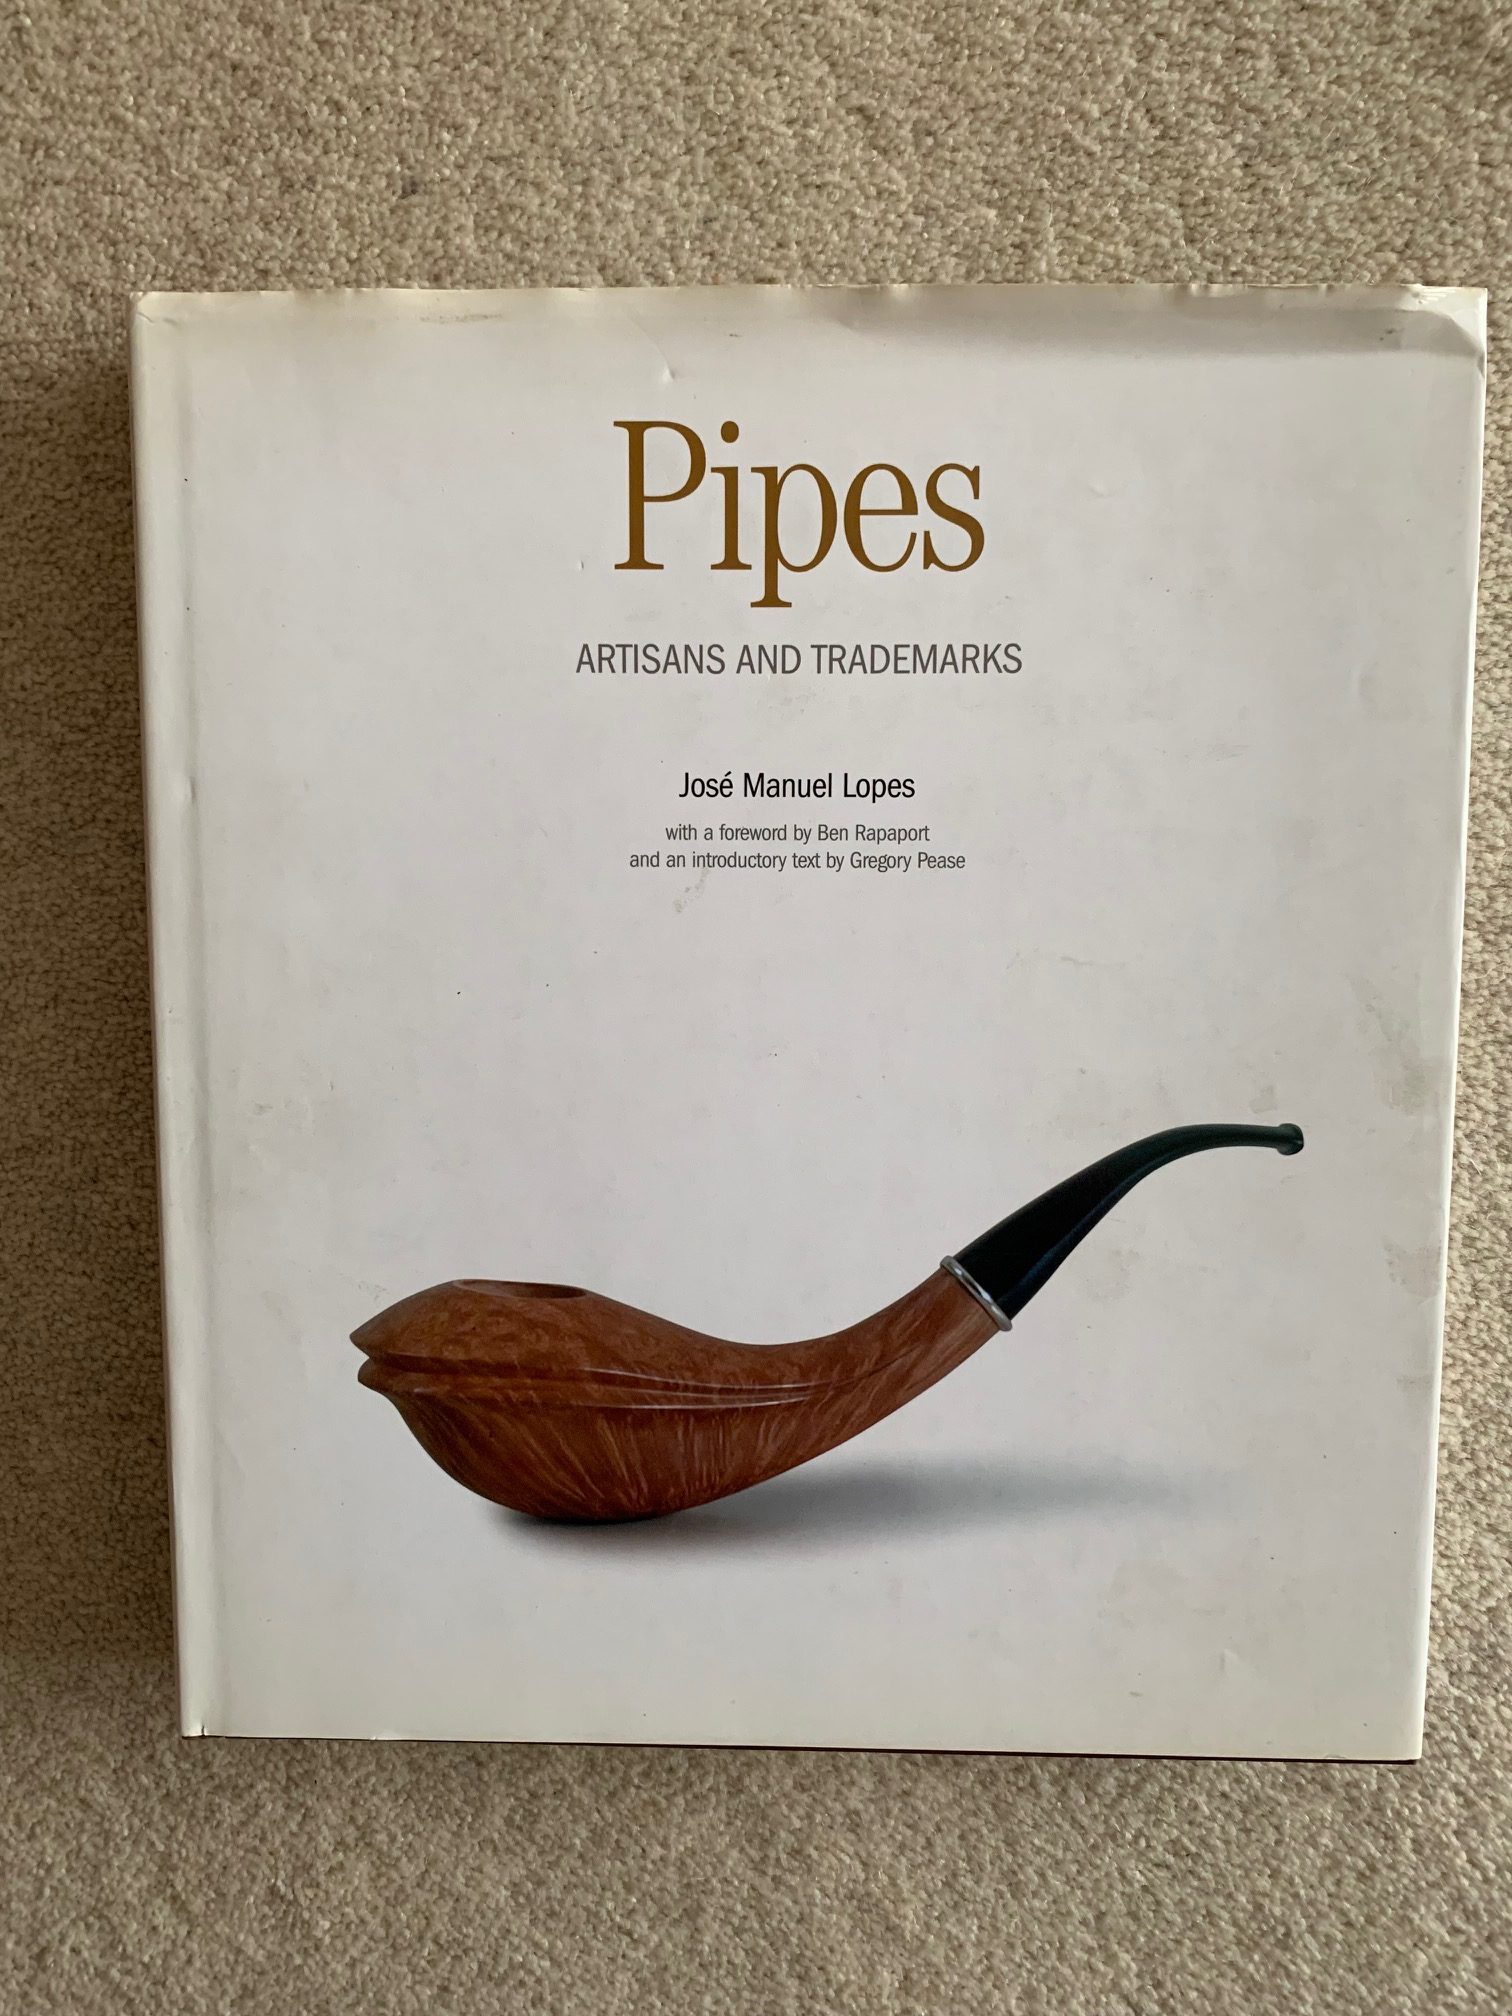 Pipes - Artisans and Trademarks by J M Lopes Image